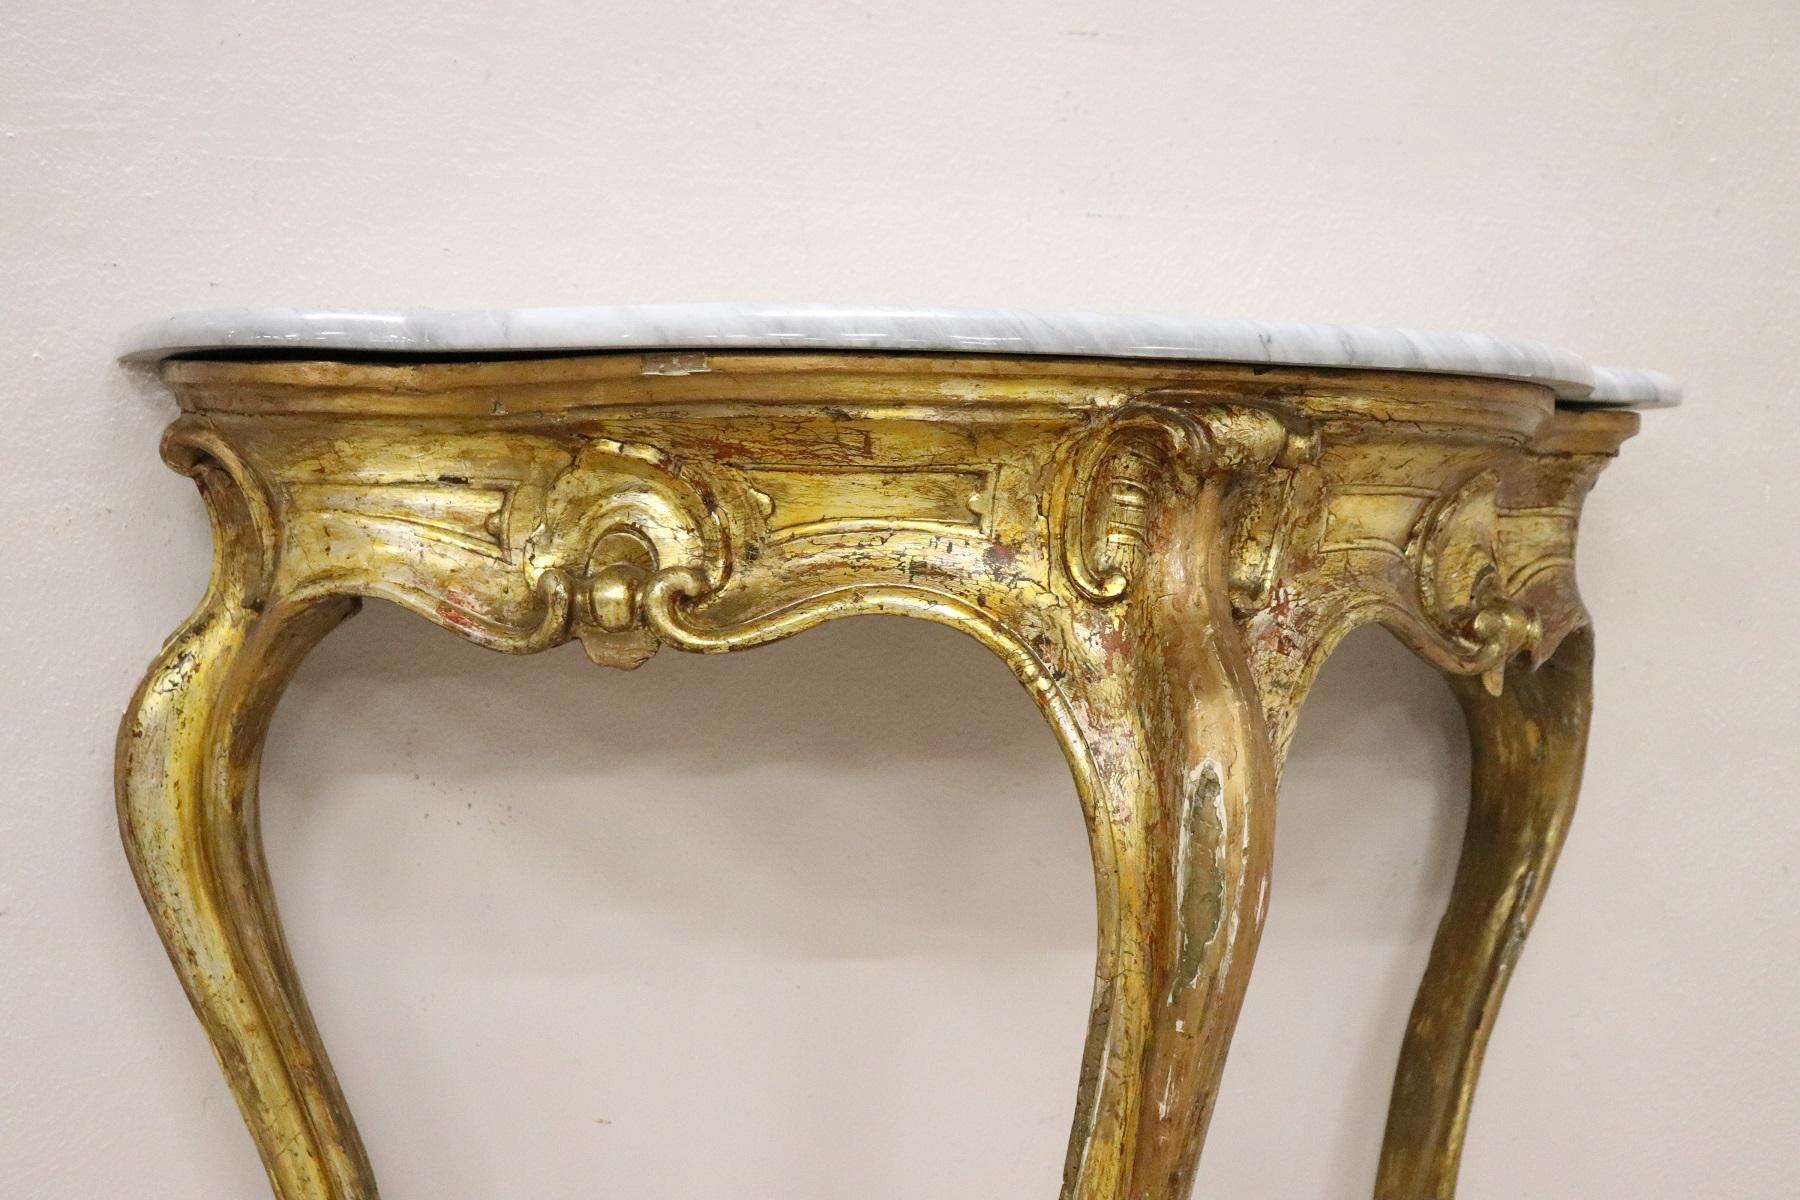 Beautiful antique Luis XV console table, 1750s. The console is made of solid carved and gilded wood. Precious Italian gray marble. Perfect to be placed even in small rooms or representative entrances. Some signs of the passage of time in gold.